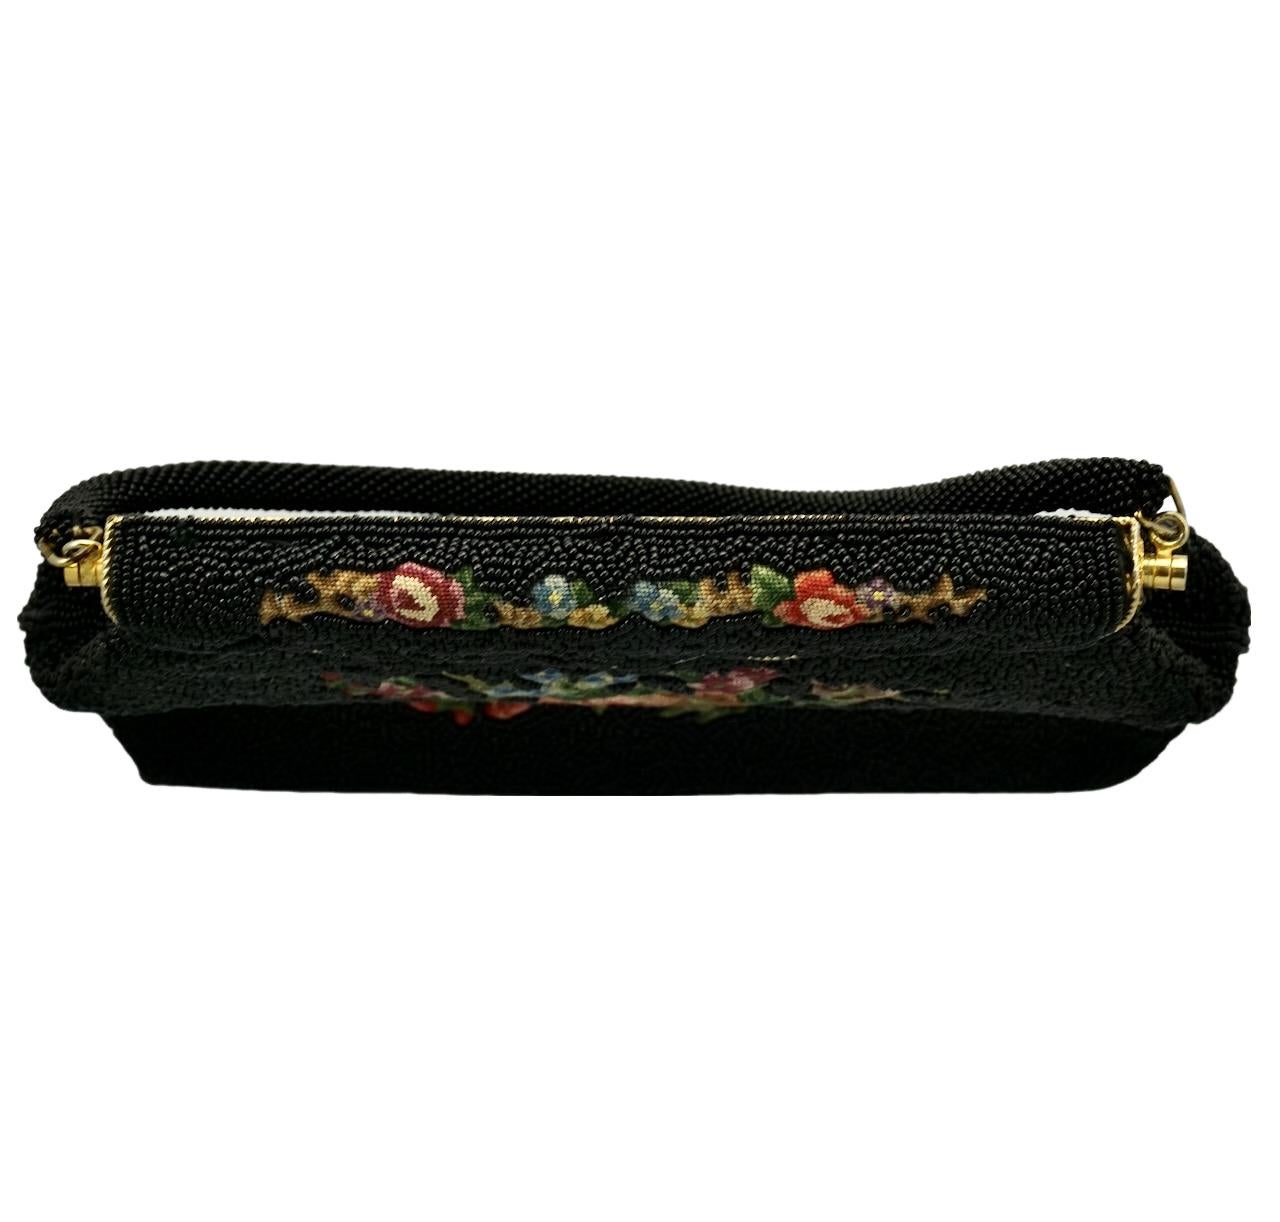 Black Beaded and Floral Tapestry Embroidered Handbag circa 1950s For Sale 1